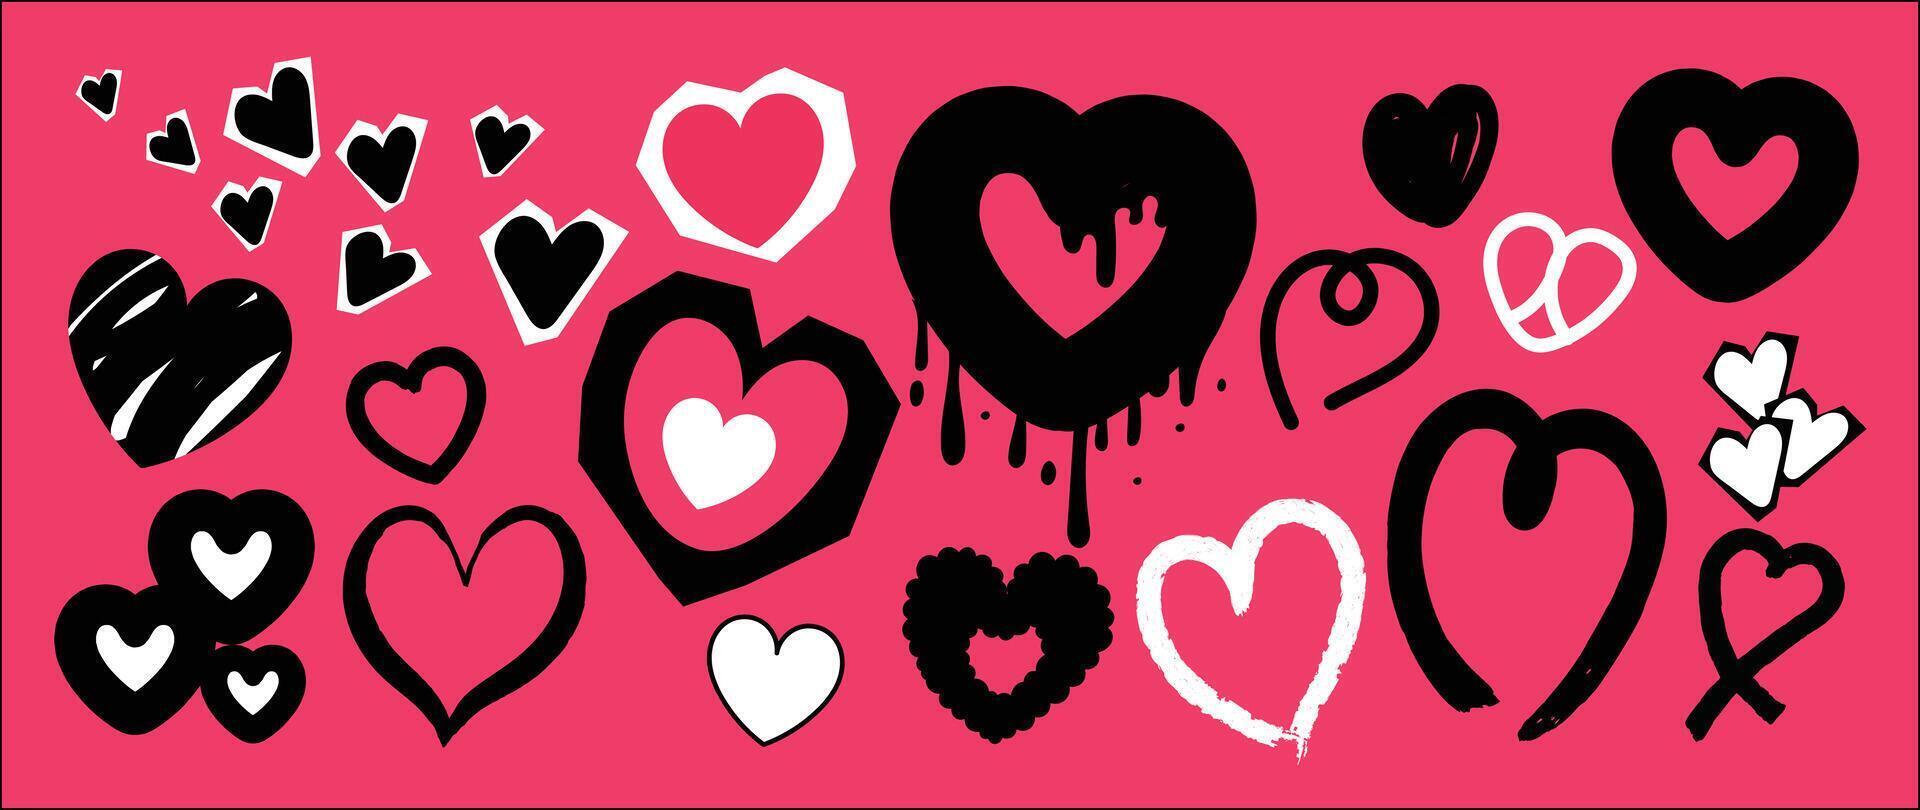 Set of spray paint valentine element vector. Hand drawn graffiti texture style collection of heart in black and pink color. Romance design illustration for print, cartoon, card, decoration, sticker. vector